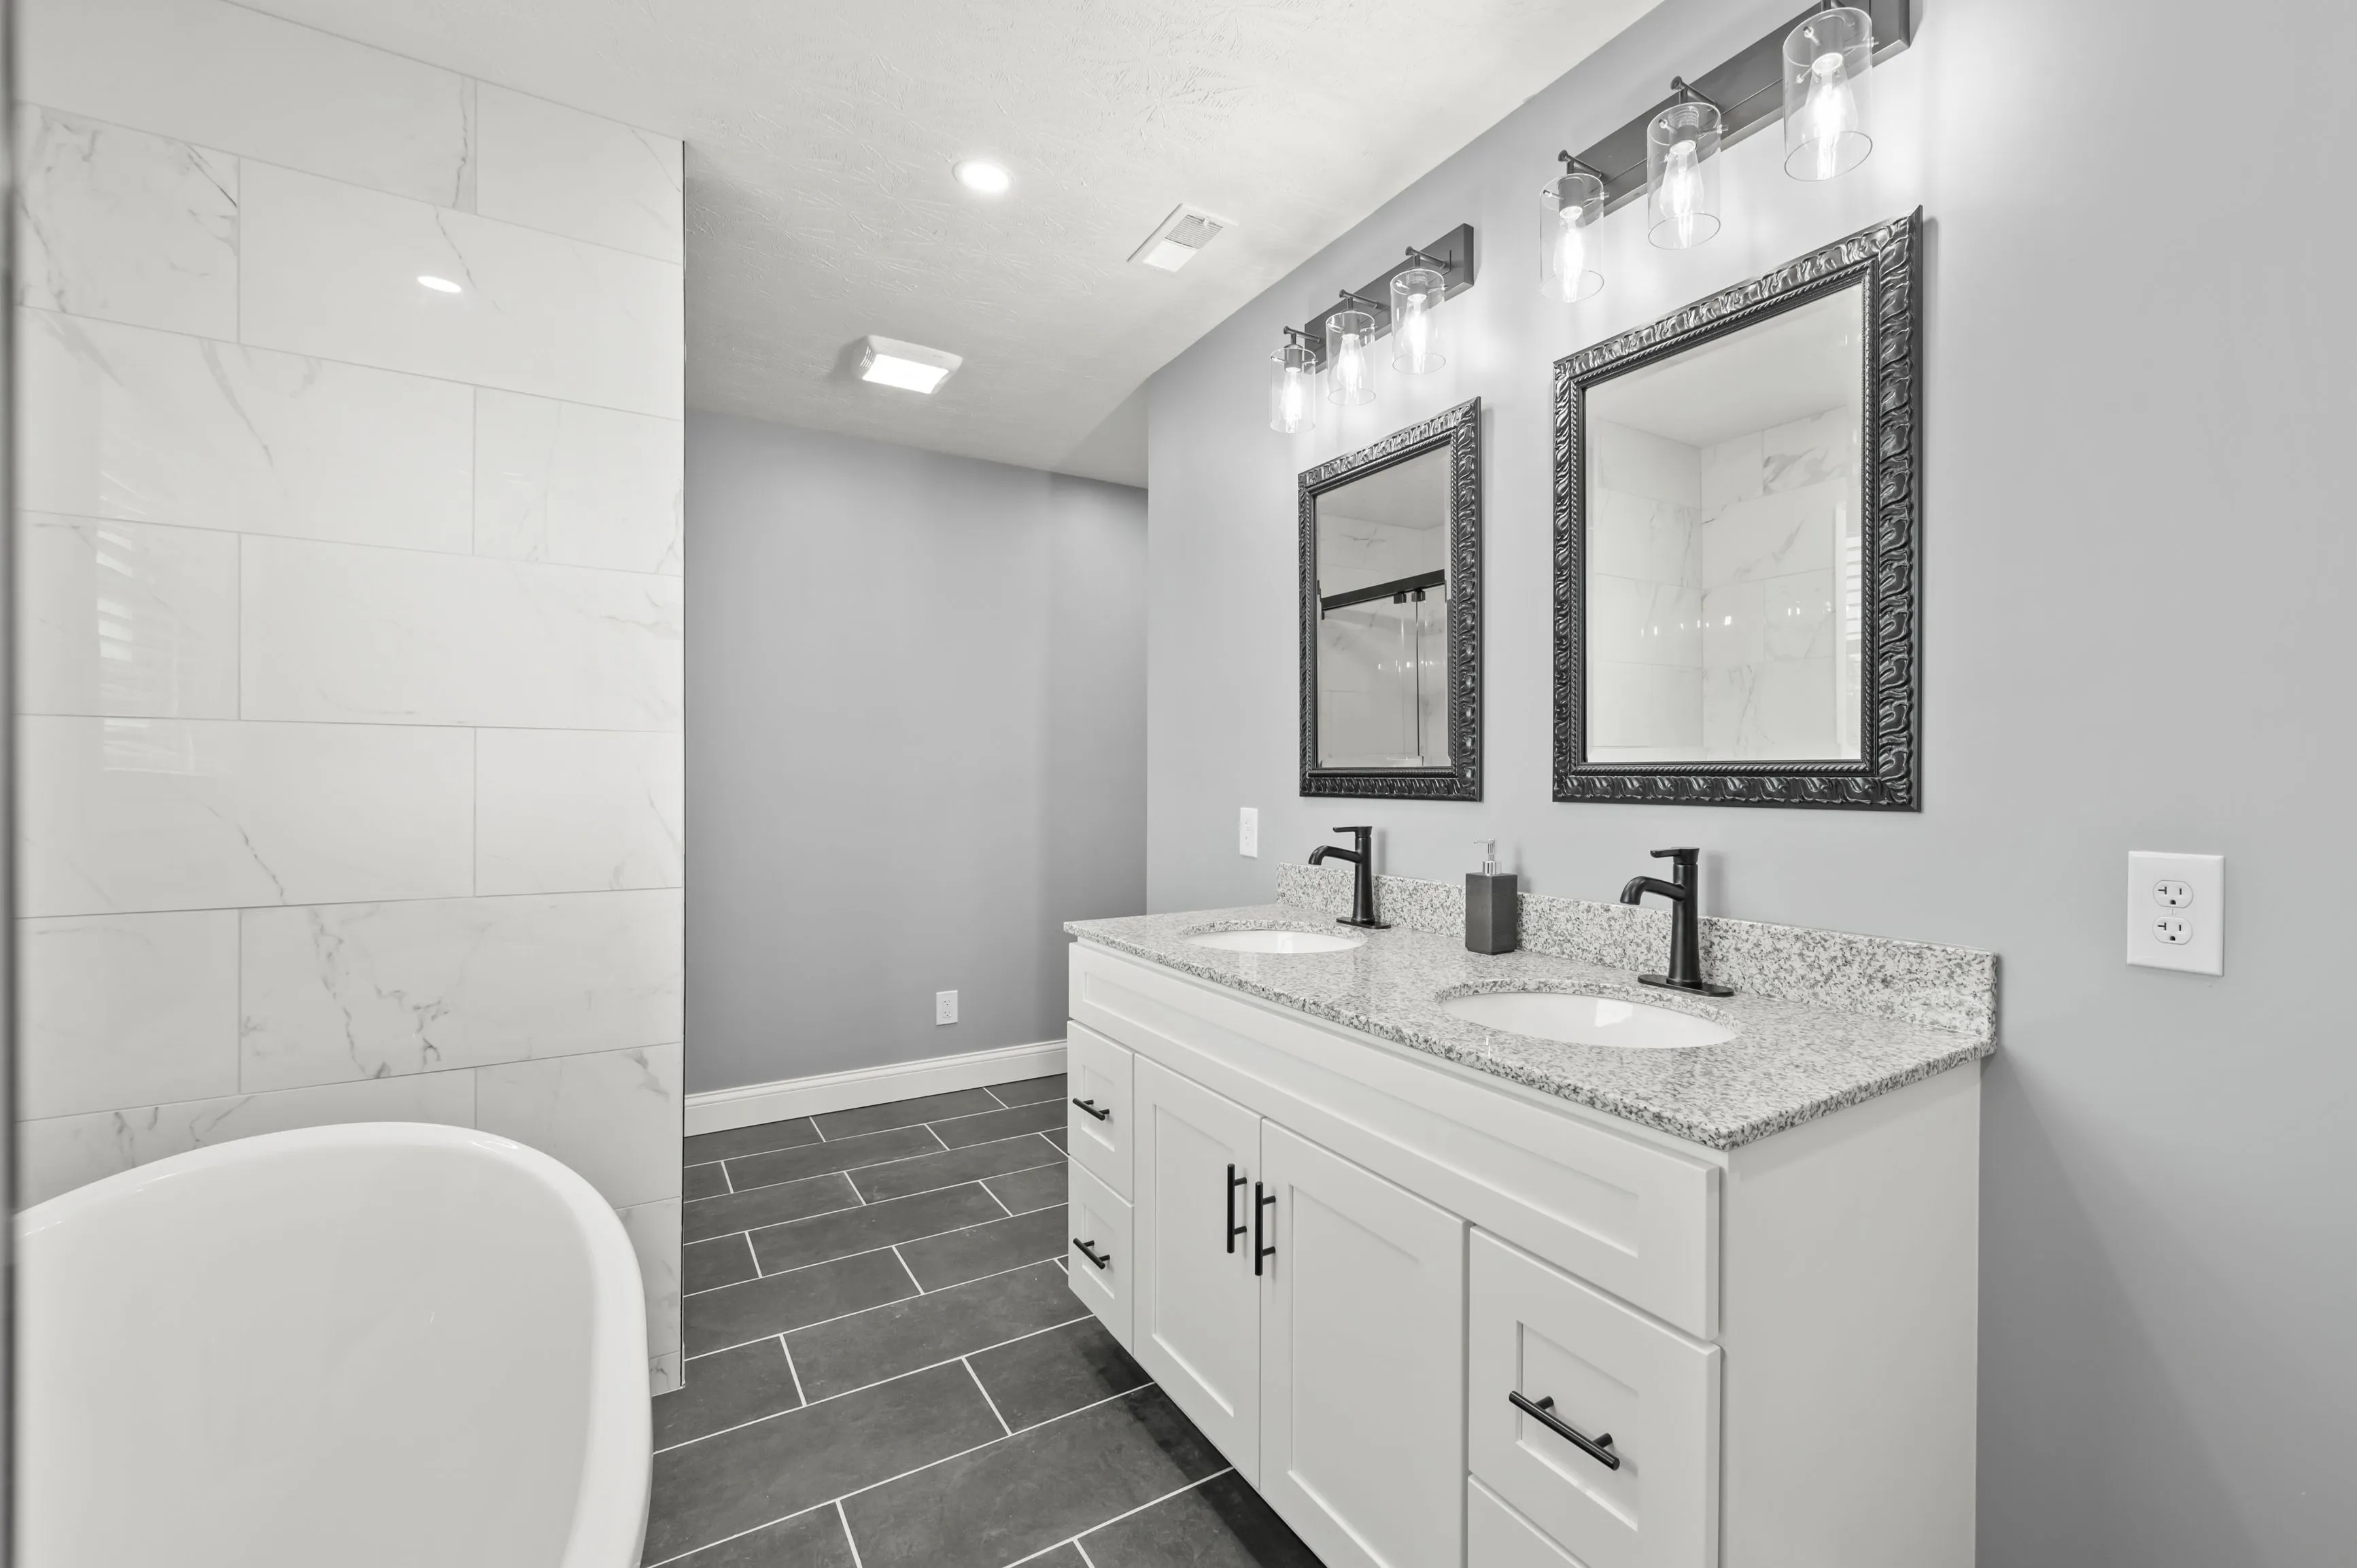 Modern bathroom interior with a white freestanding tub, double vanity with black faucets, matching framed mirrors, and gray tiled flooring.